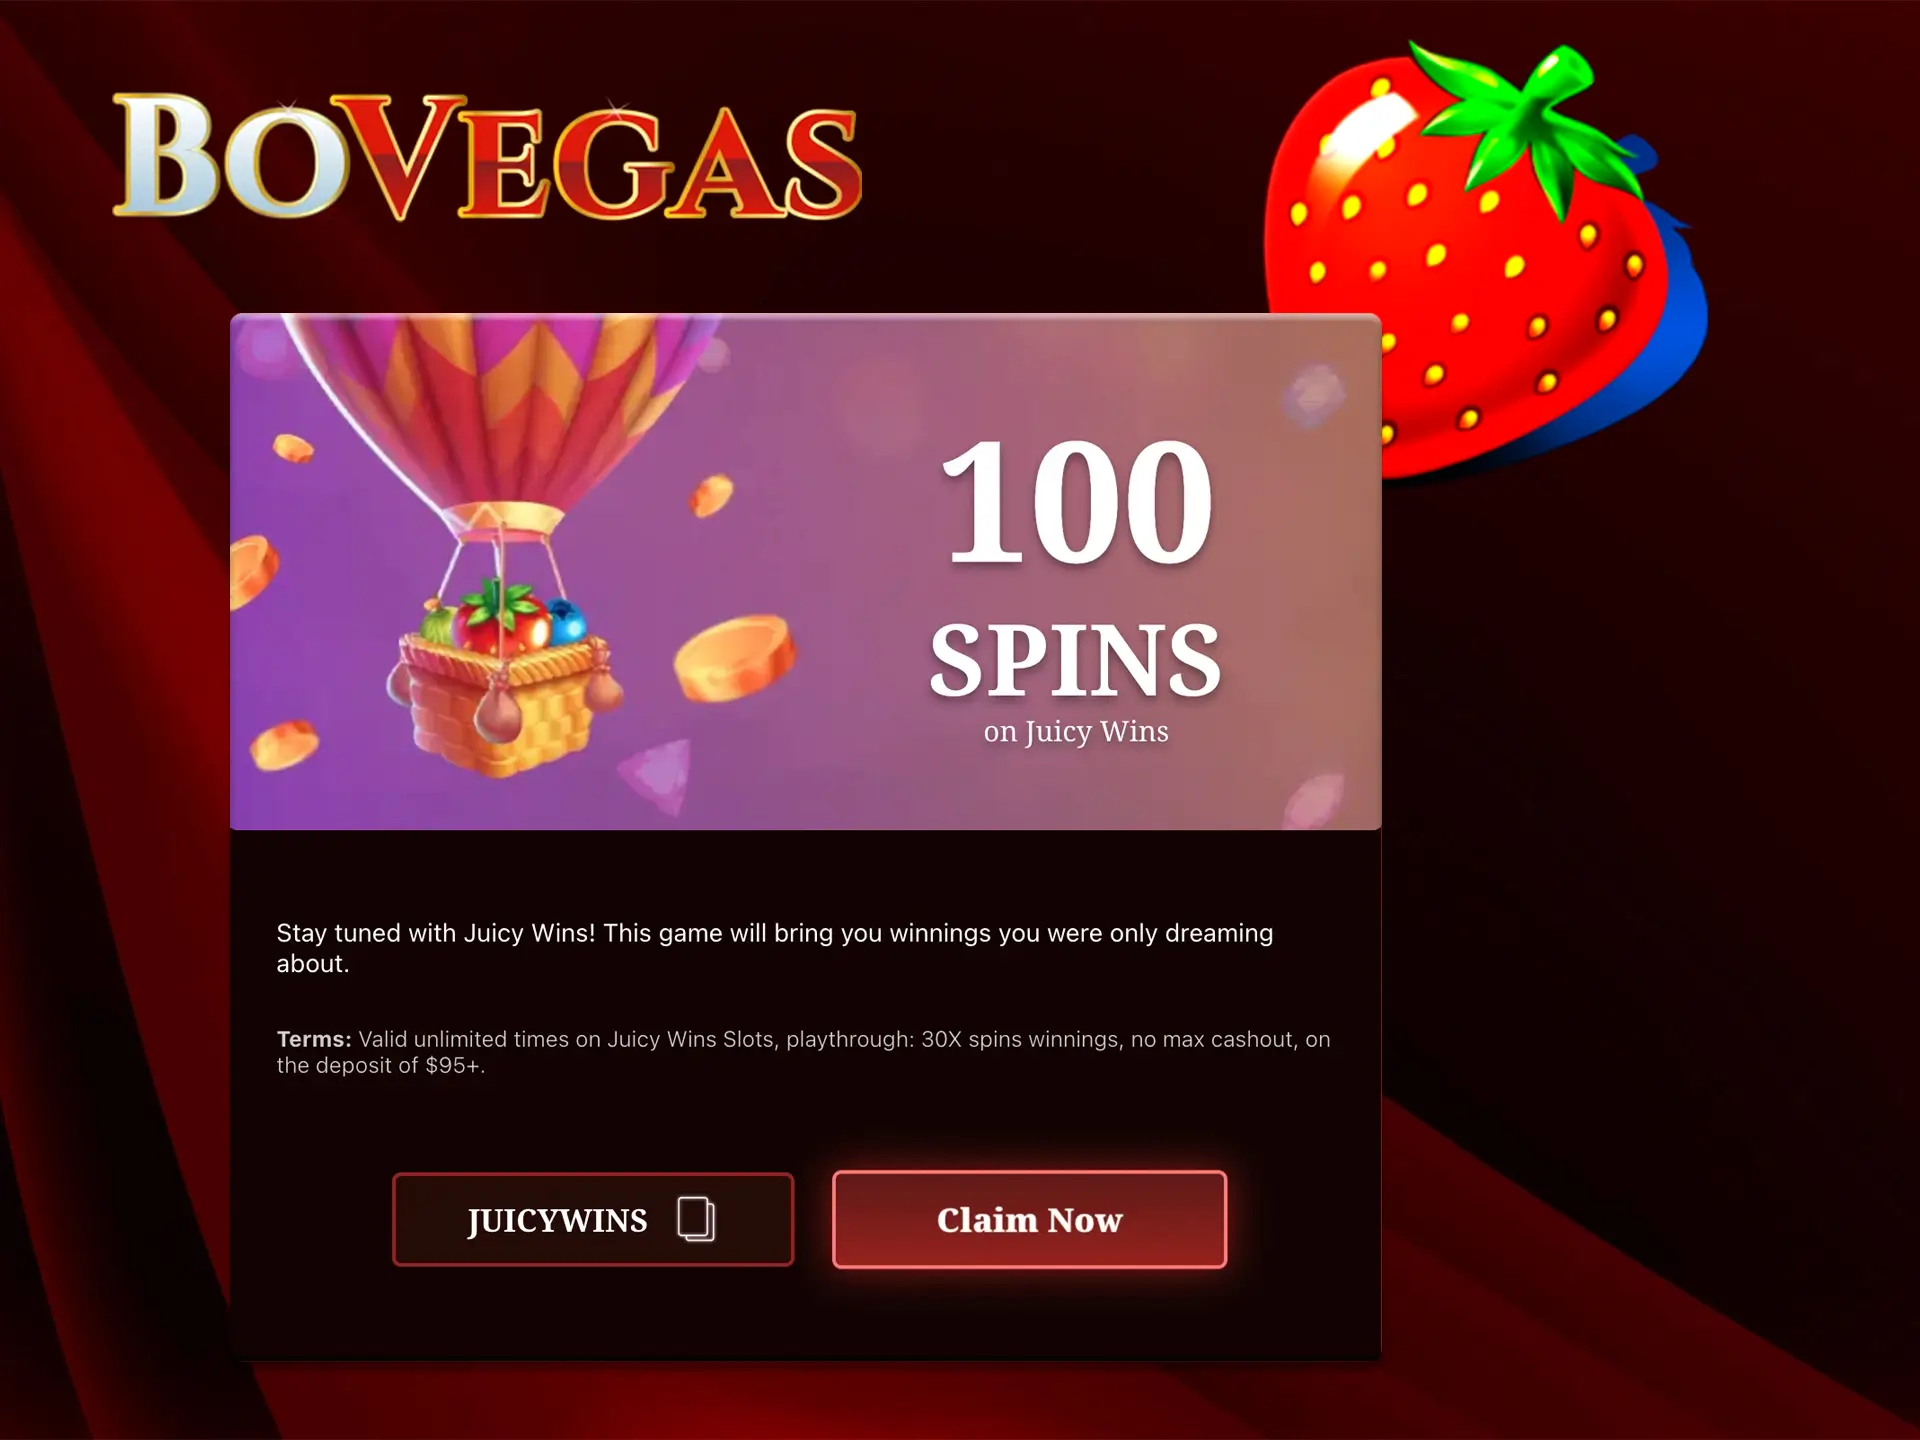 Play the Juicy Wins slot and don't forget the promo code that will give you 100 BoVegas free spins.